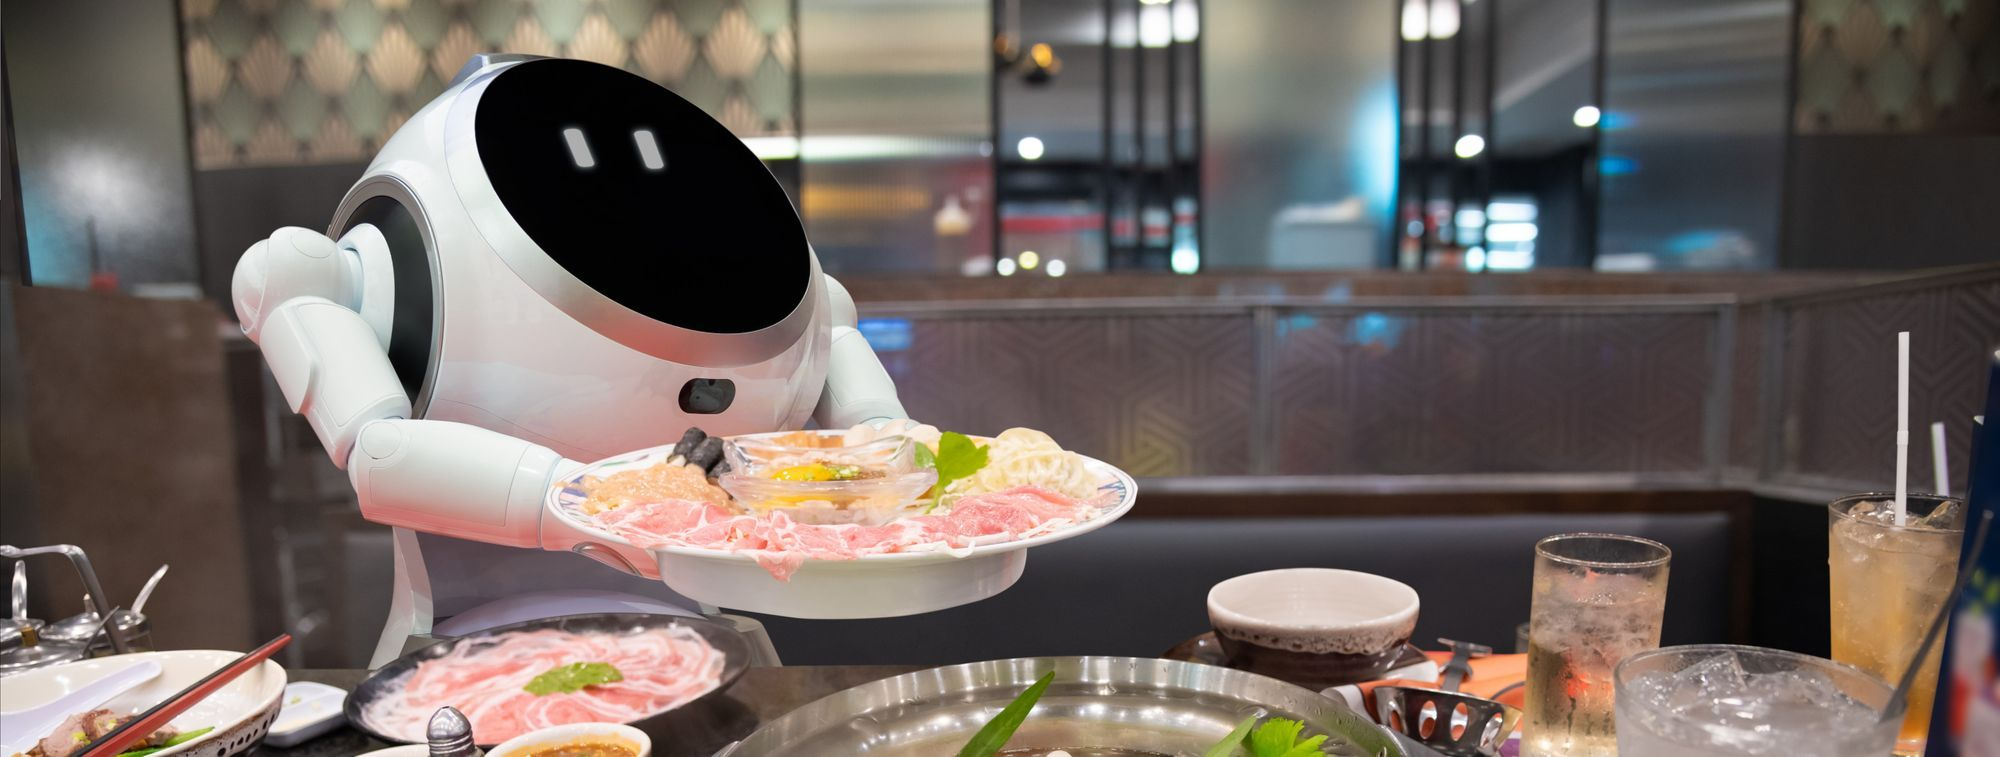 Artificial Intelligence (AI) in Foodservice Market'